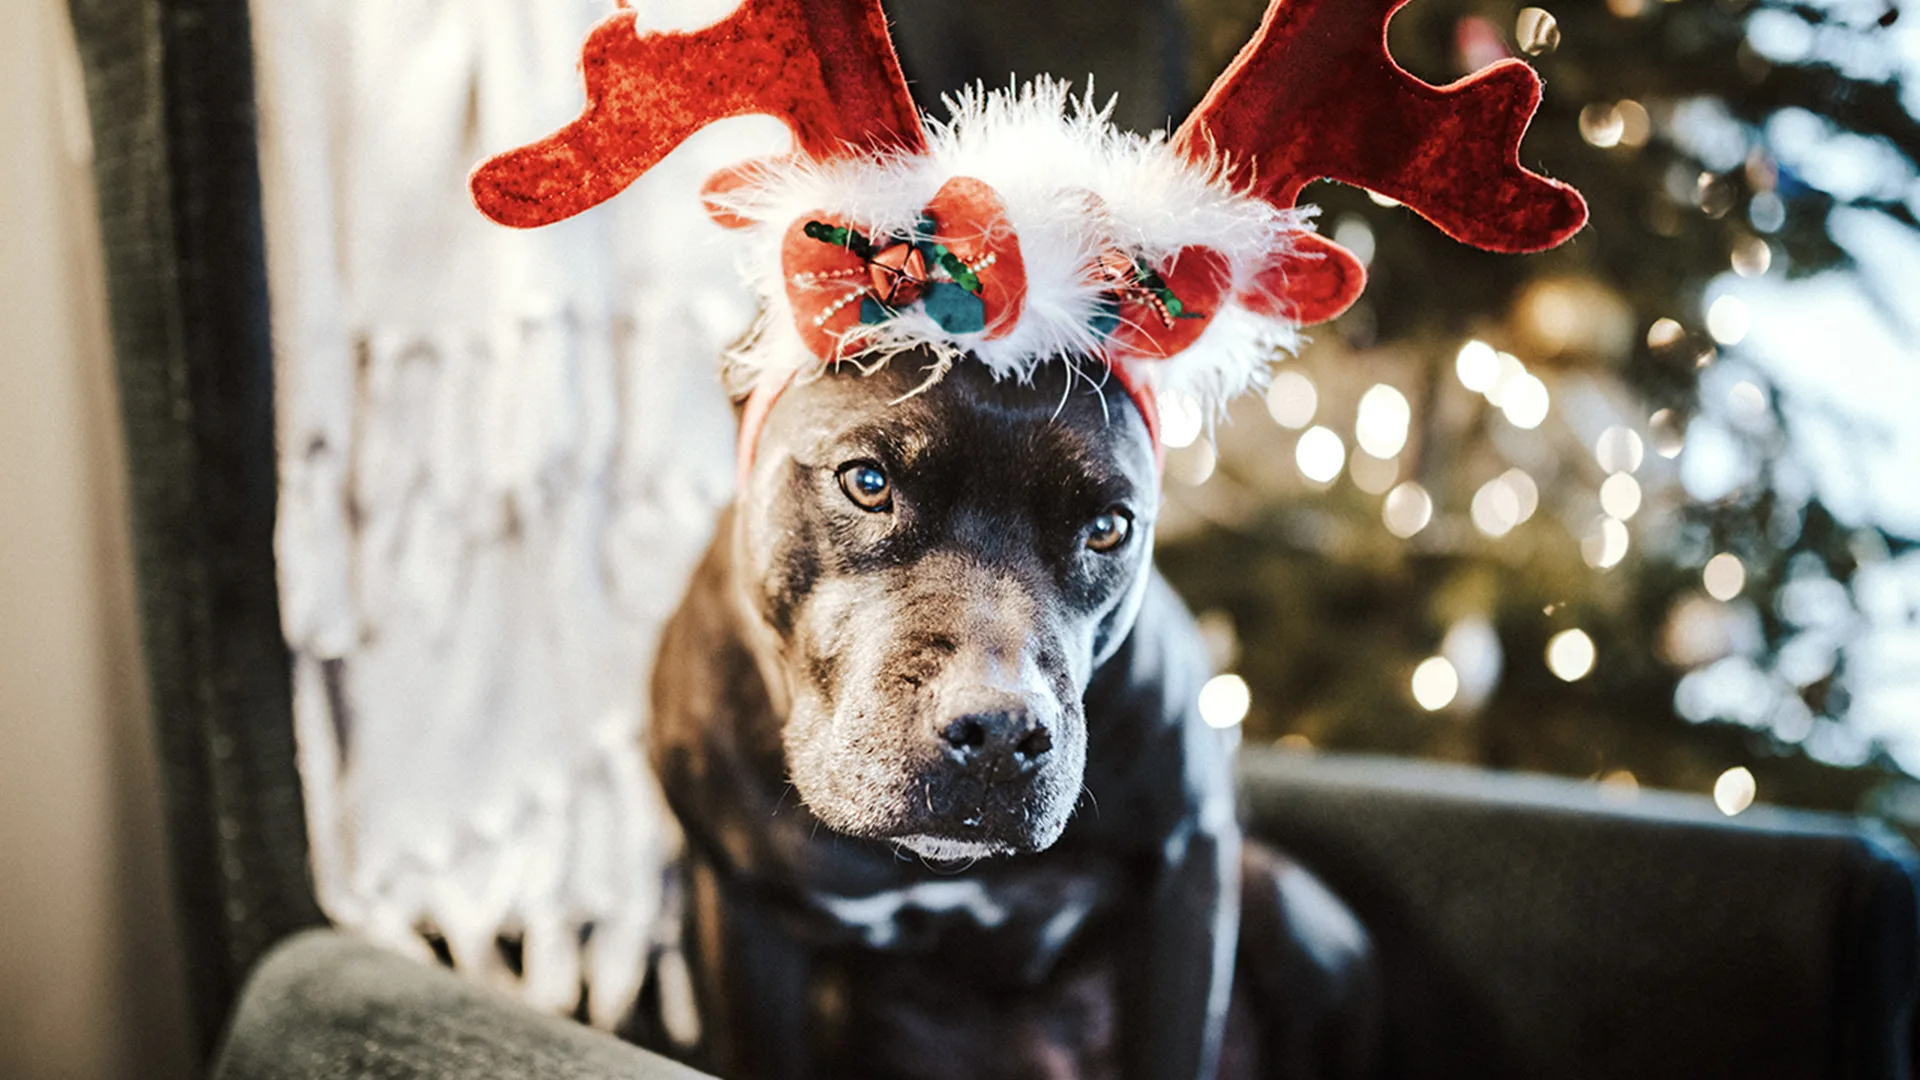 Staffy type dog with Christmas antlers on